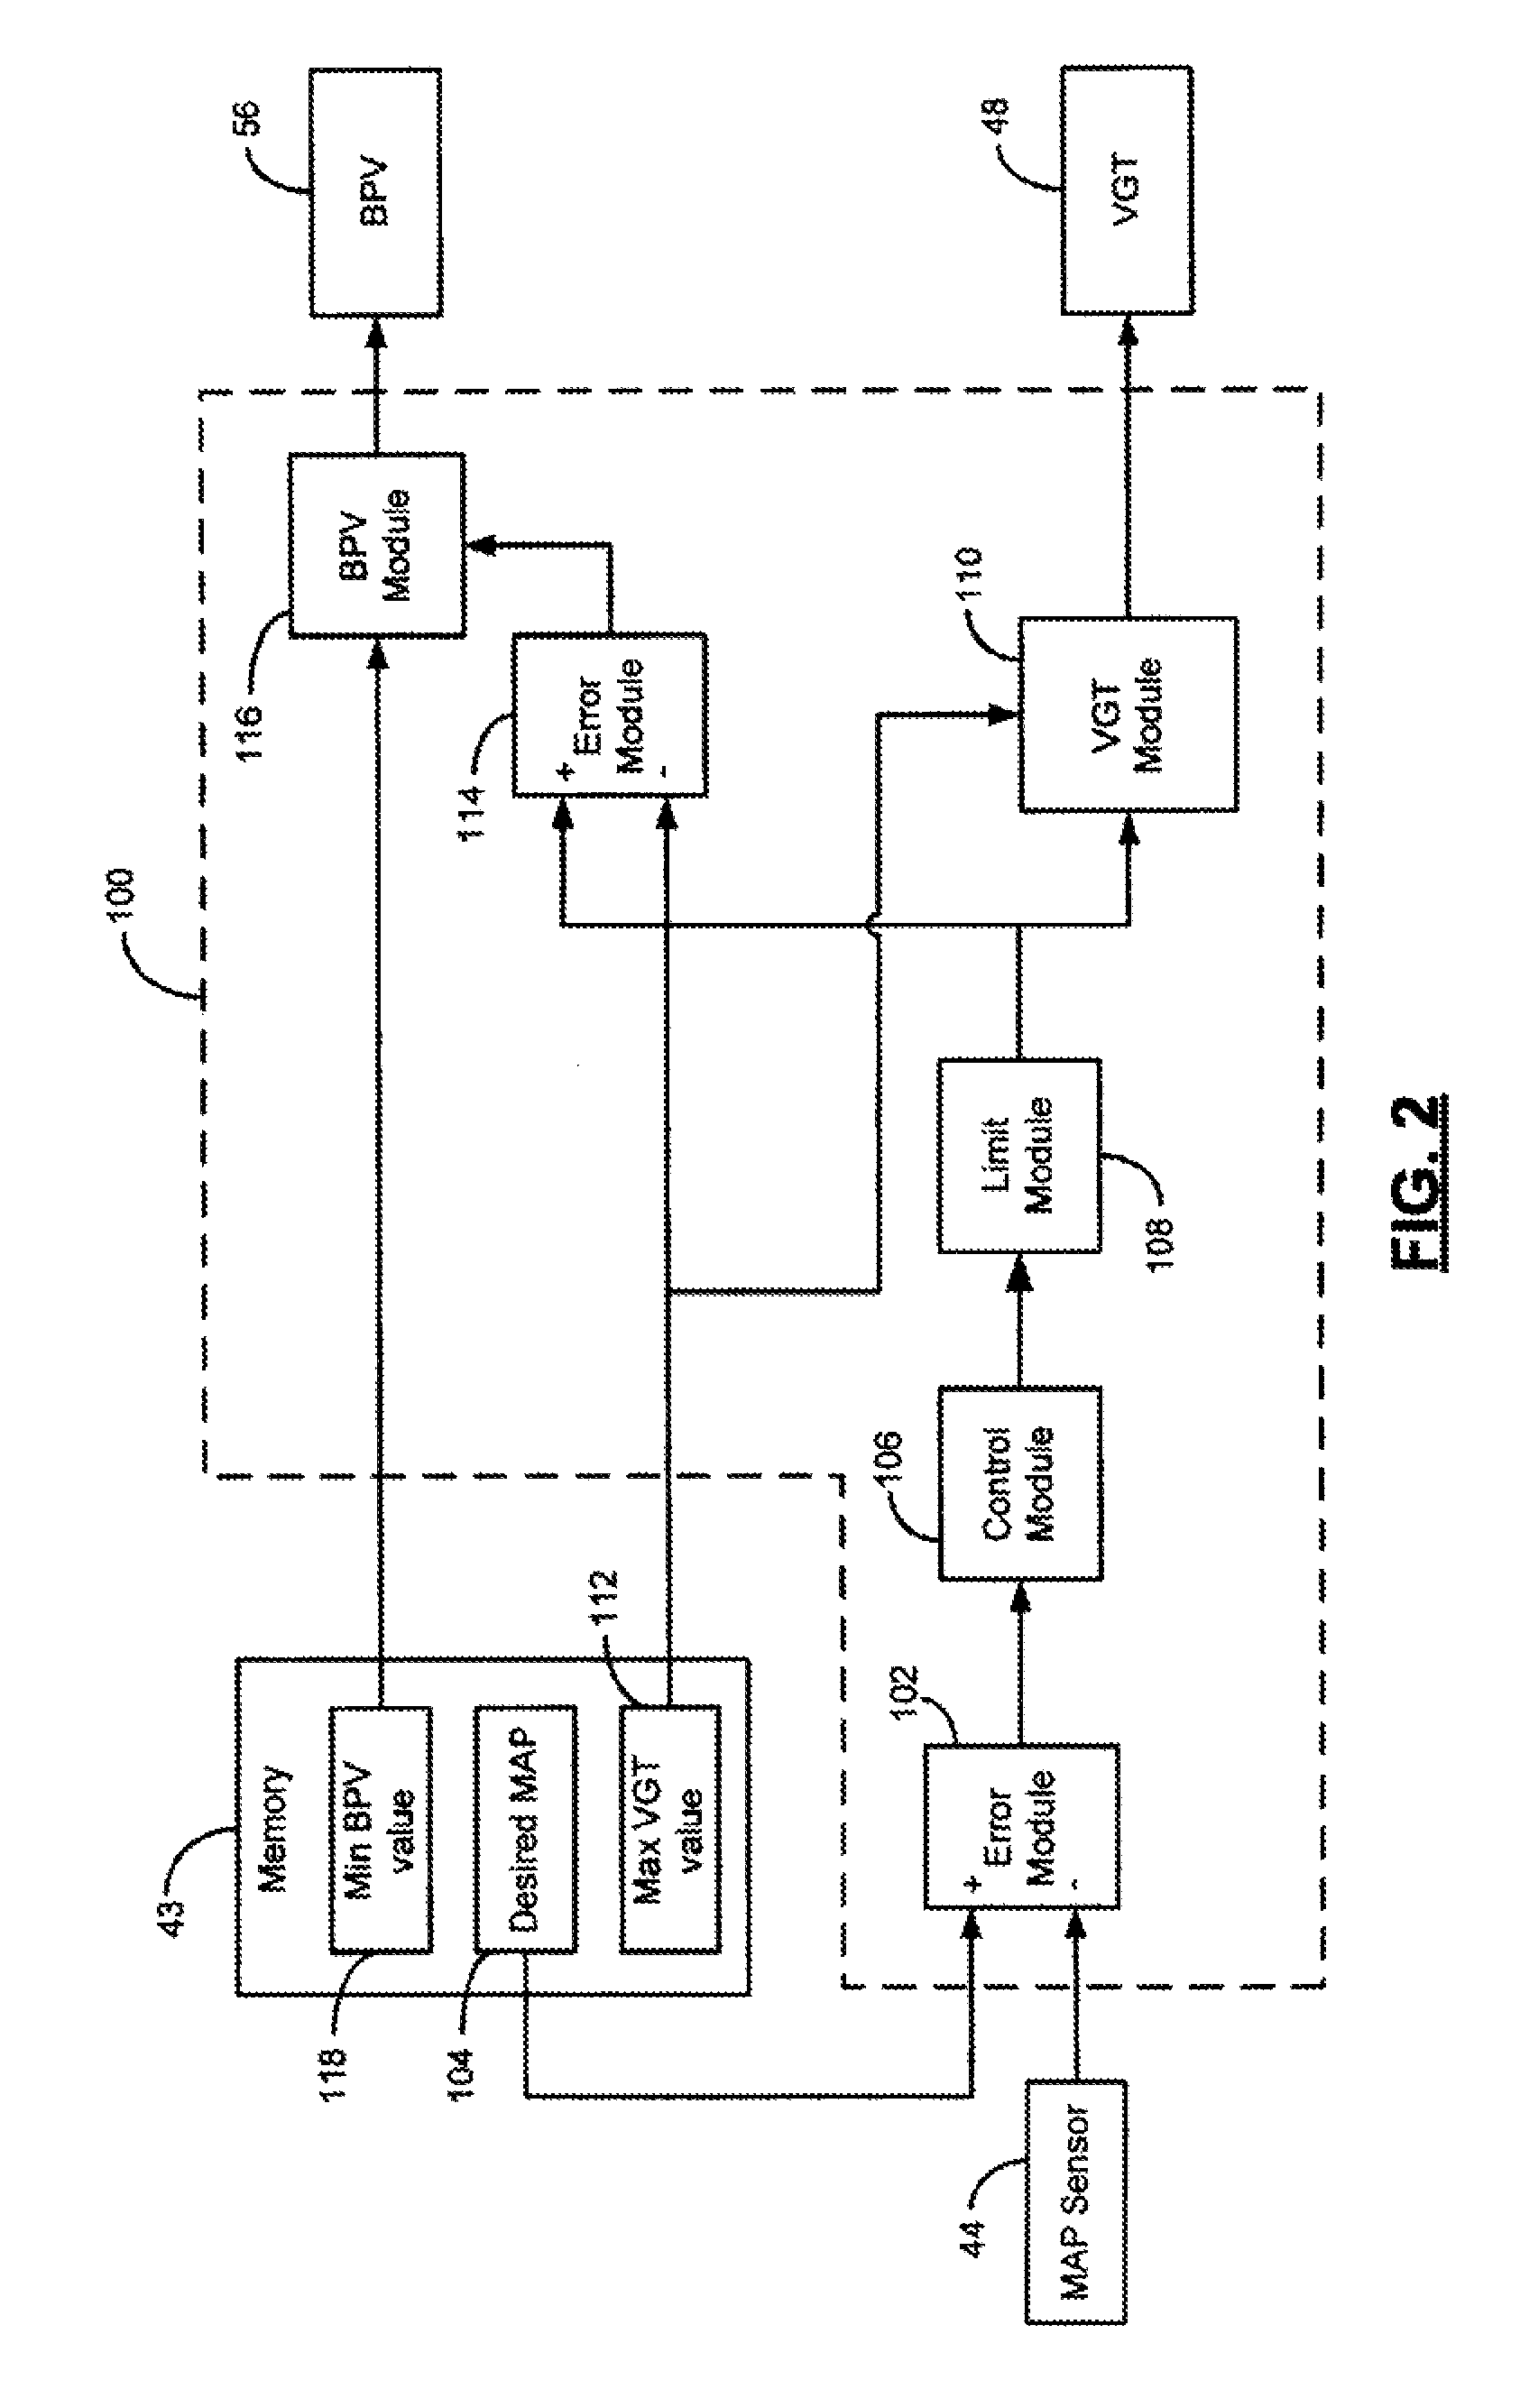 Dual stage turbocharger control system